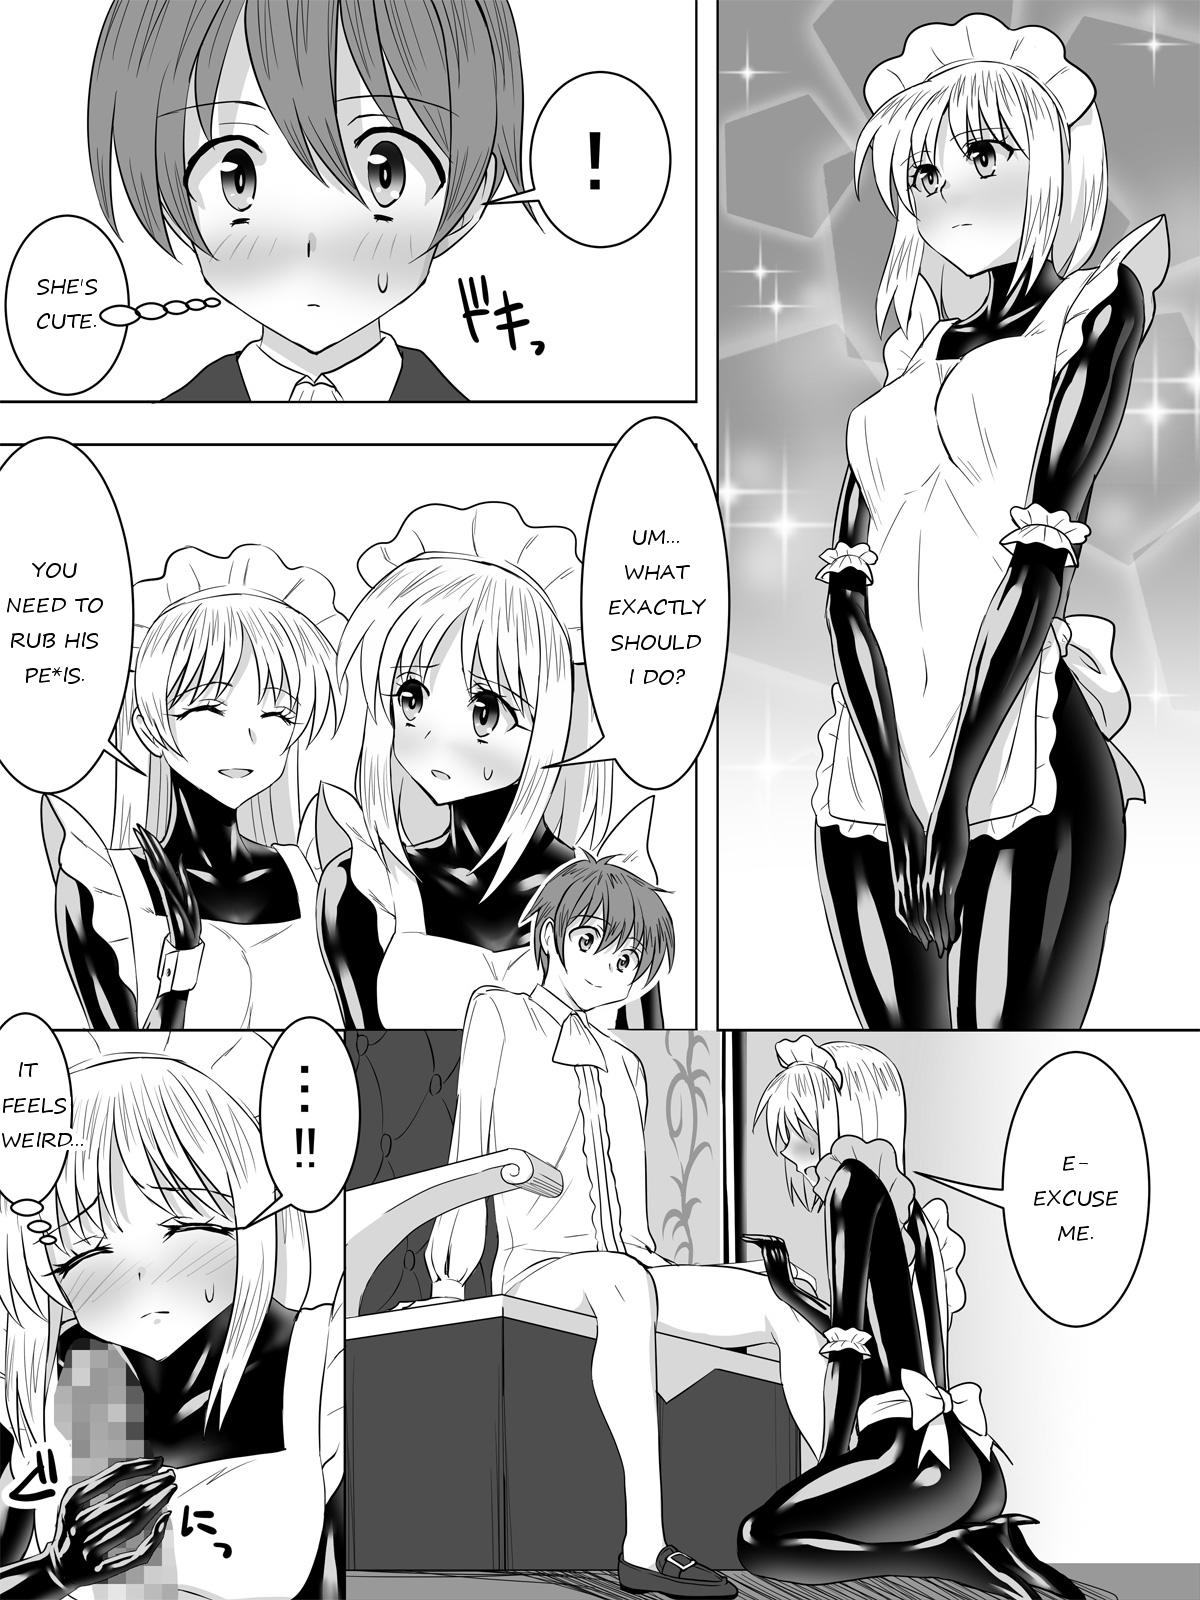 Free Blow Job Picchiri Suit Maid to Doutei Kizoku | The Maid in the Tight Suit and the Virgin Aristocrat Blowjob Contest - Page 12